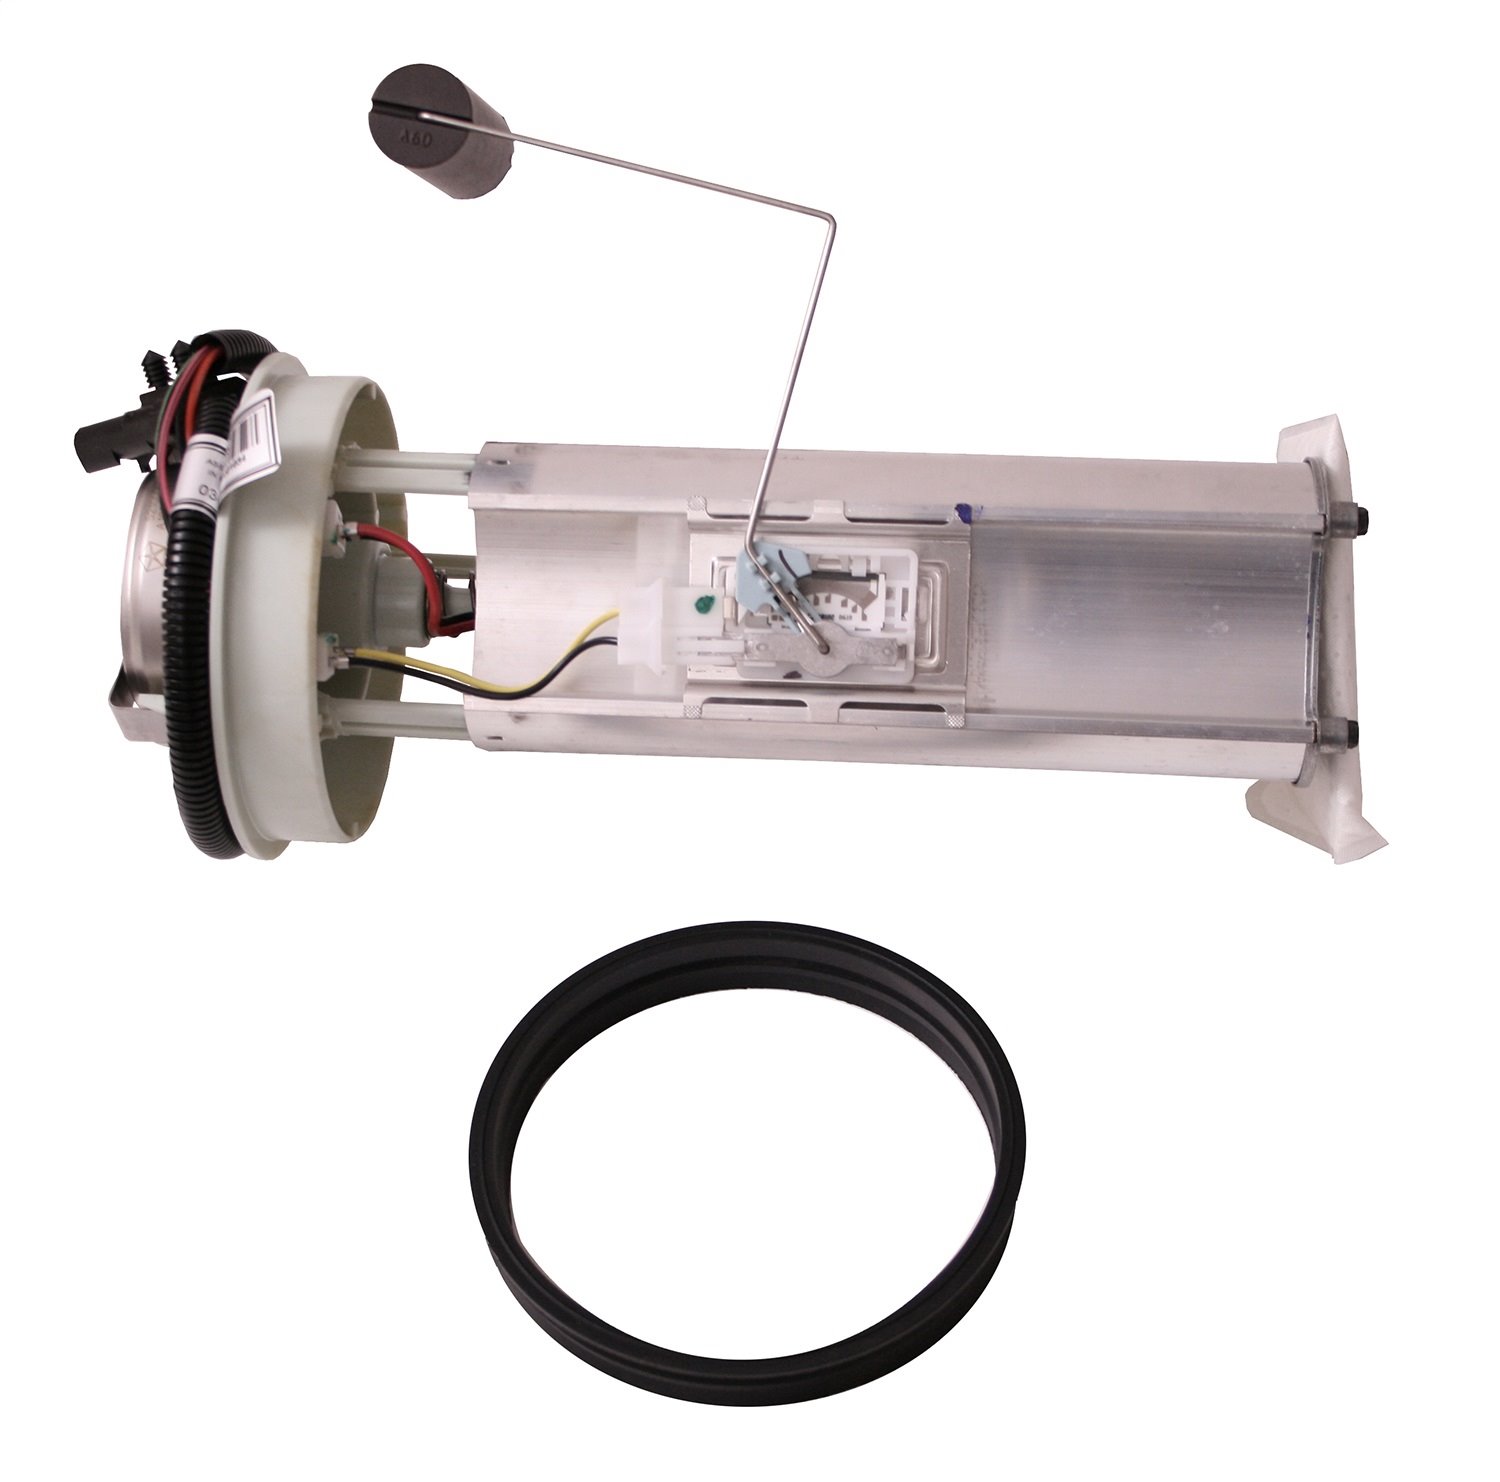 Replacement fuel pump module from Omix-ADA, Fits 1996 Jeep Cherokees XJ with a 2.5L engine.